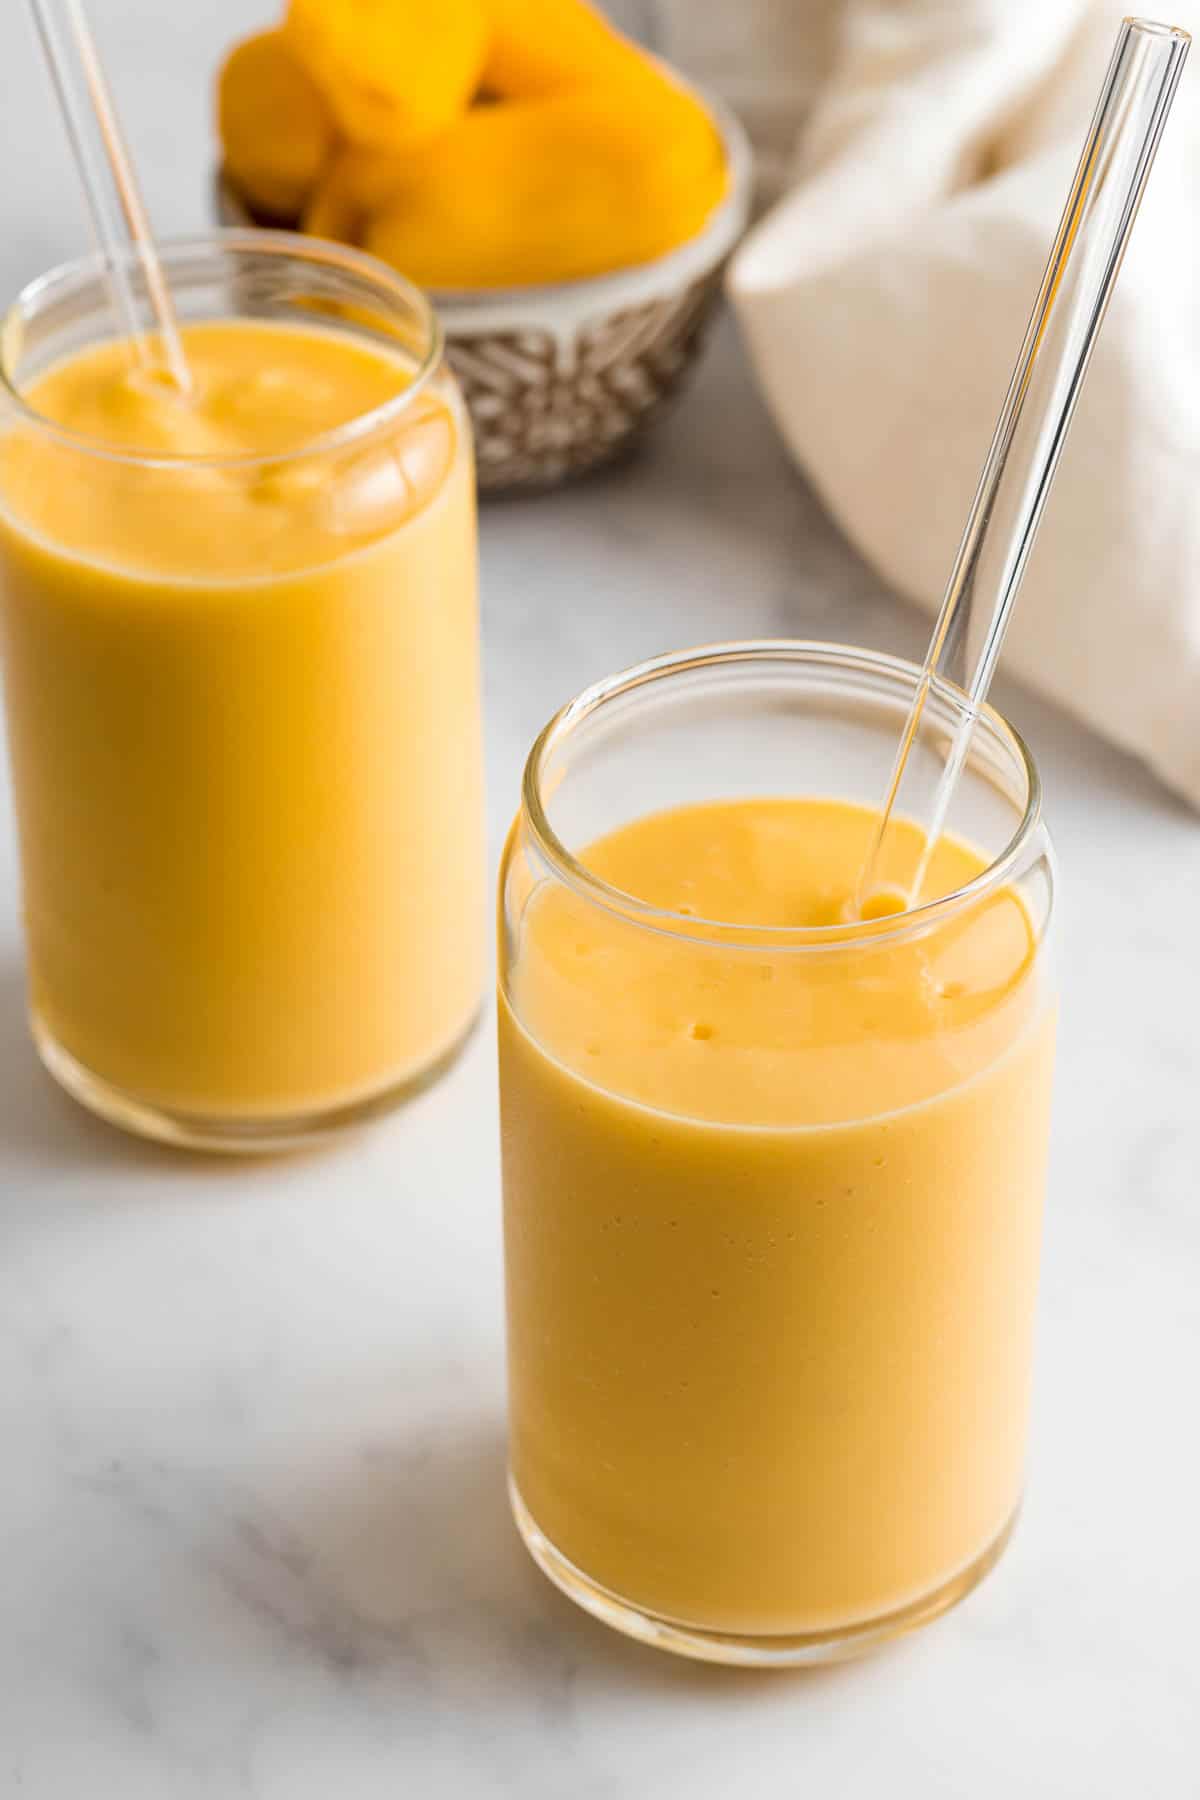 Two jackfruit smoothies in glass with glass straws.